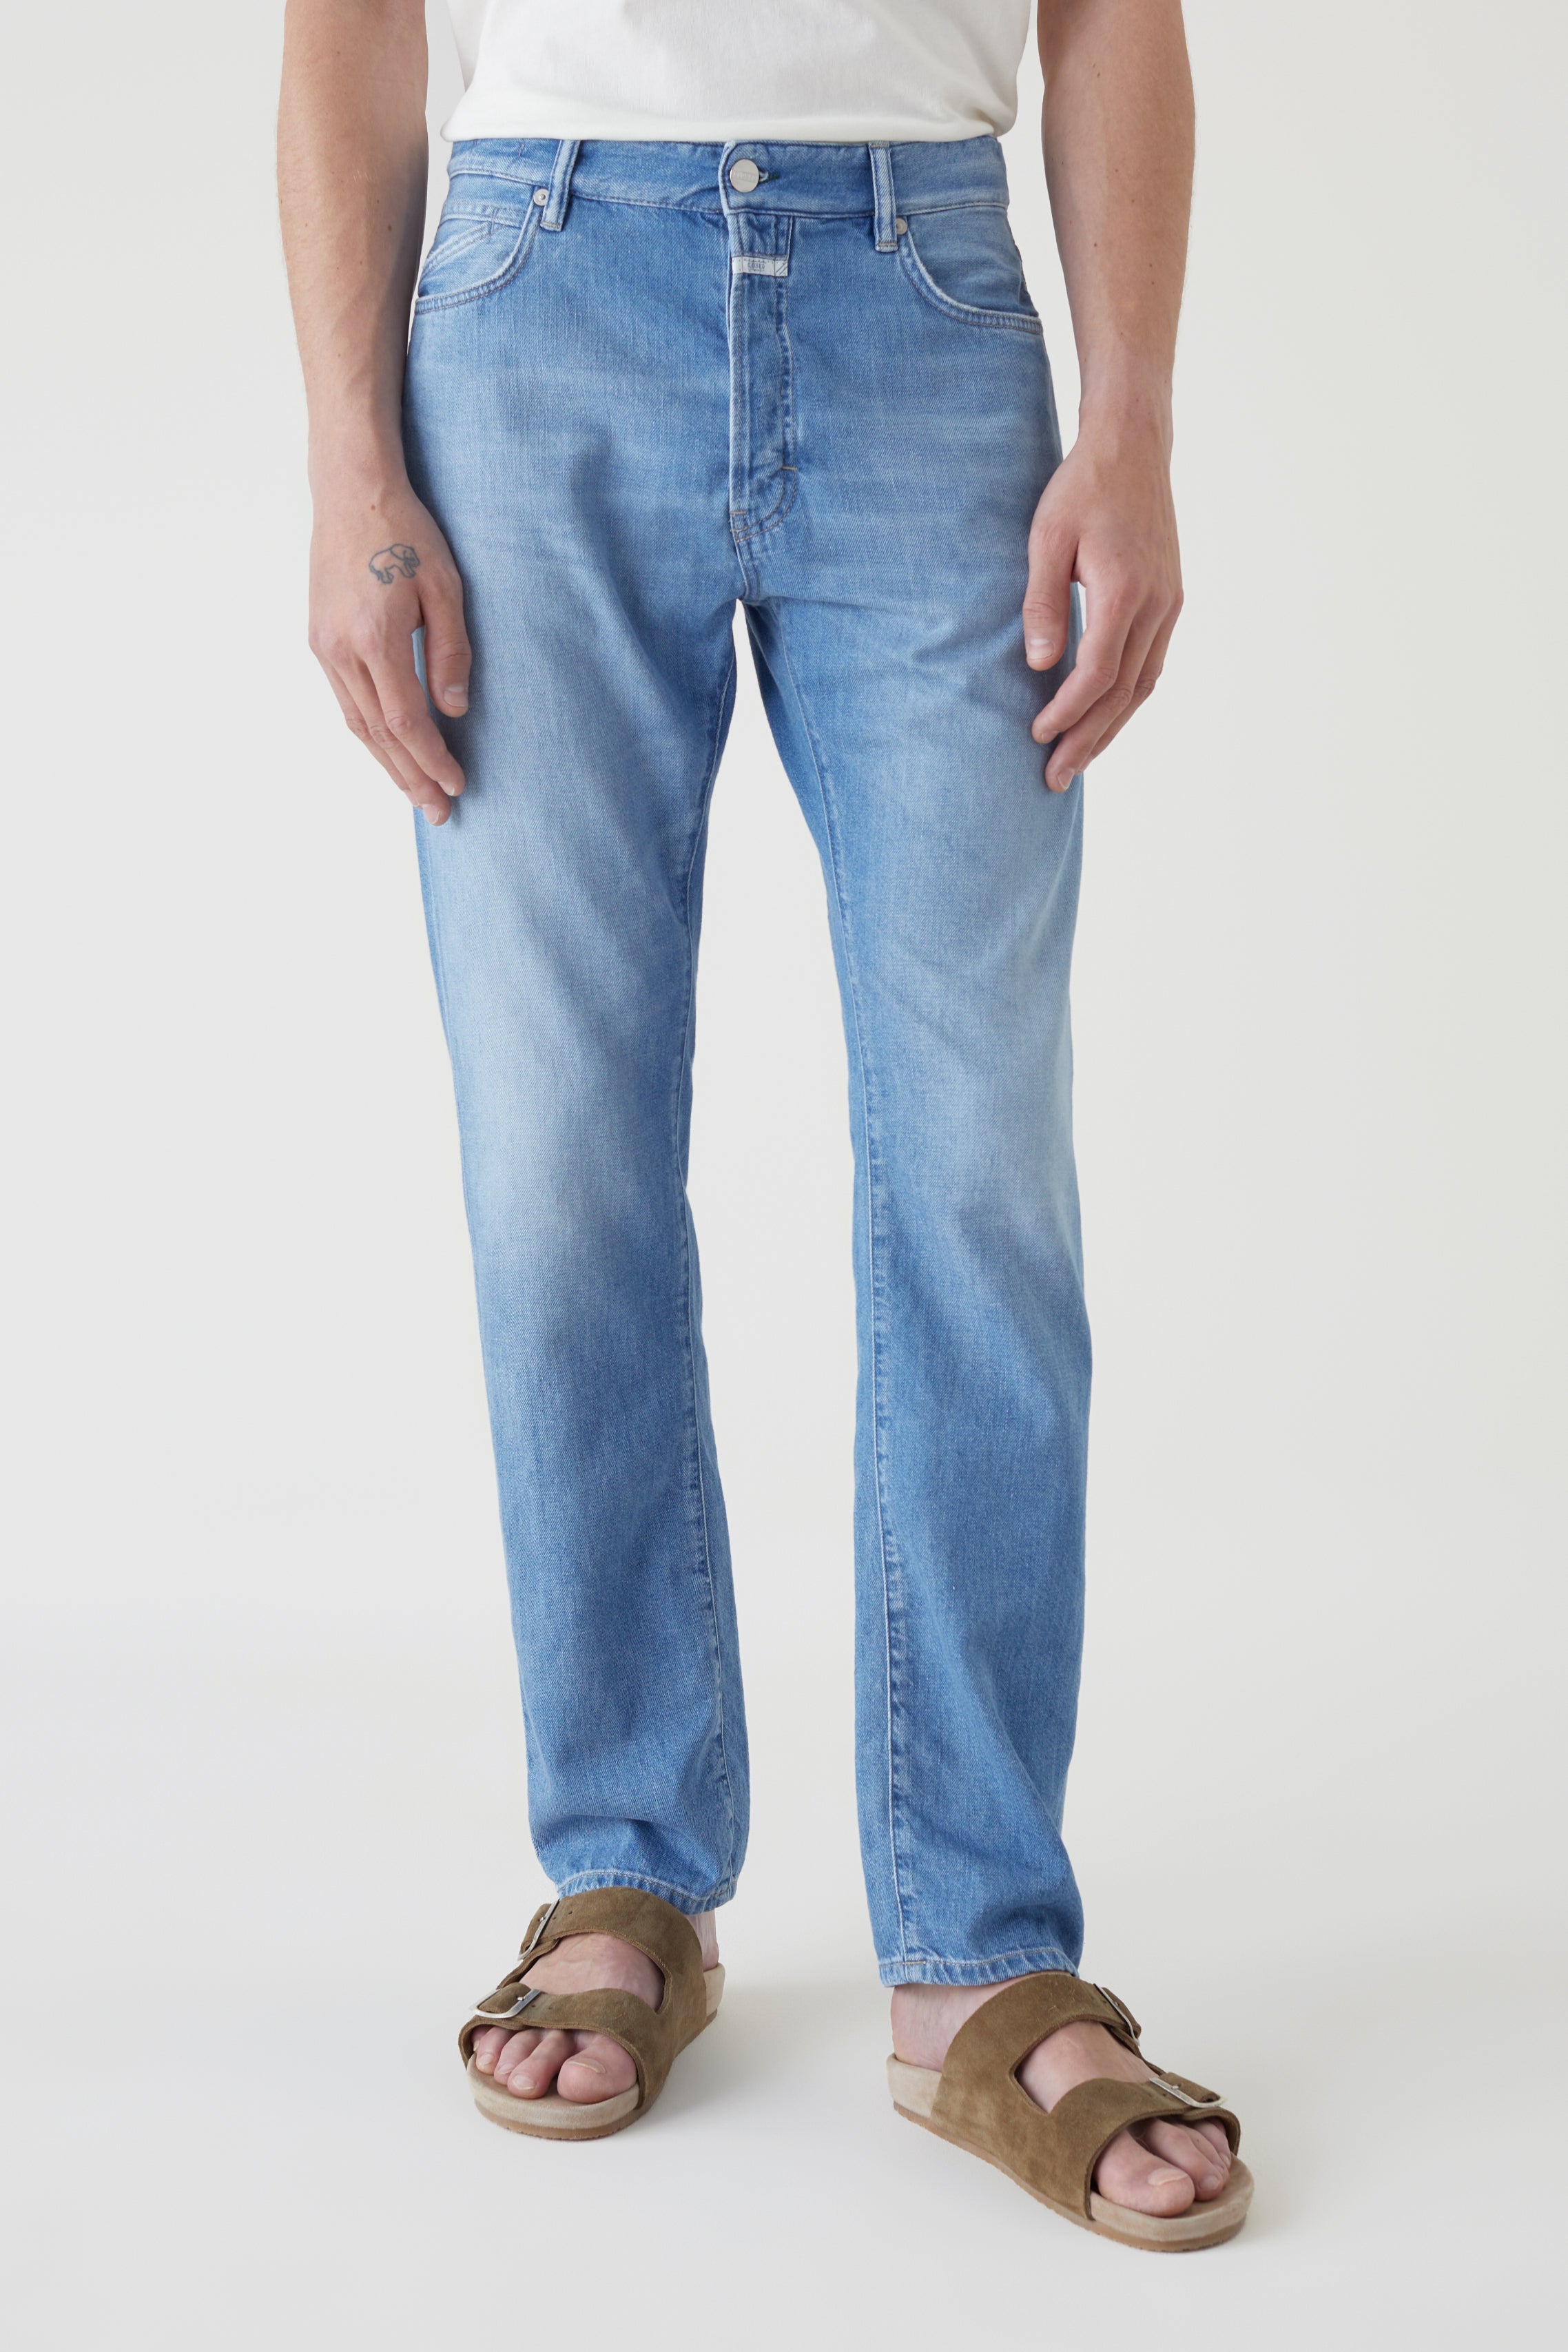 CLOSED-OUTLET-SALE-STYLE-NAME-OAKLAND-STRAIGHT-JEANS-Hosen-ARCHIVE-COLLECTION_13954a5b-842a-4863-b491-02398ec60d6b.jpg